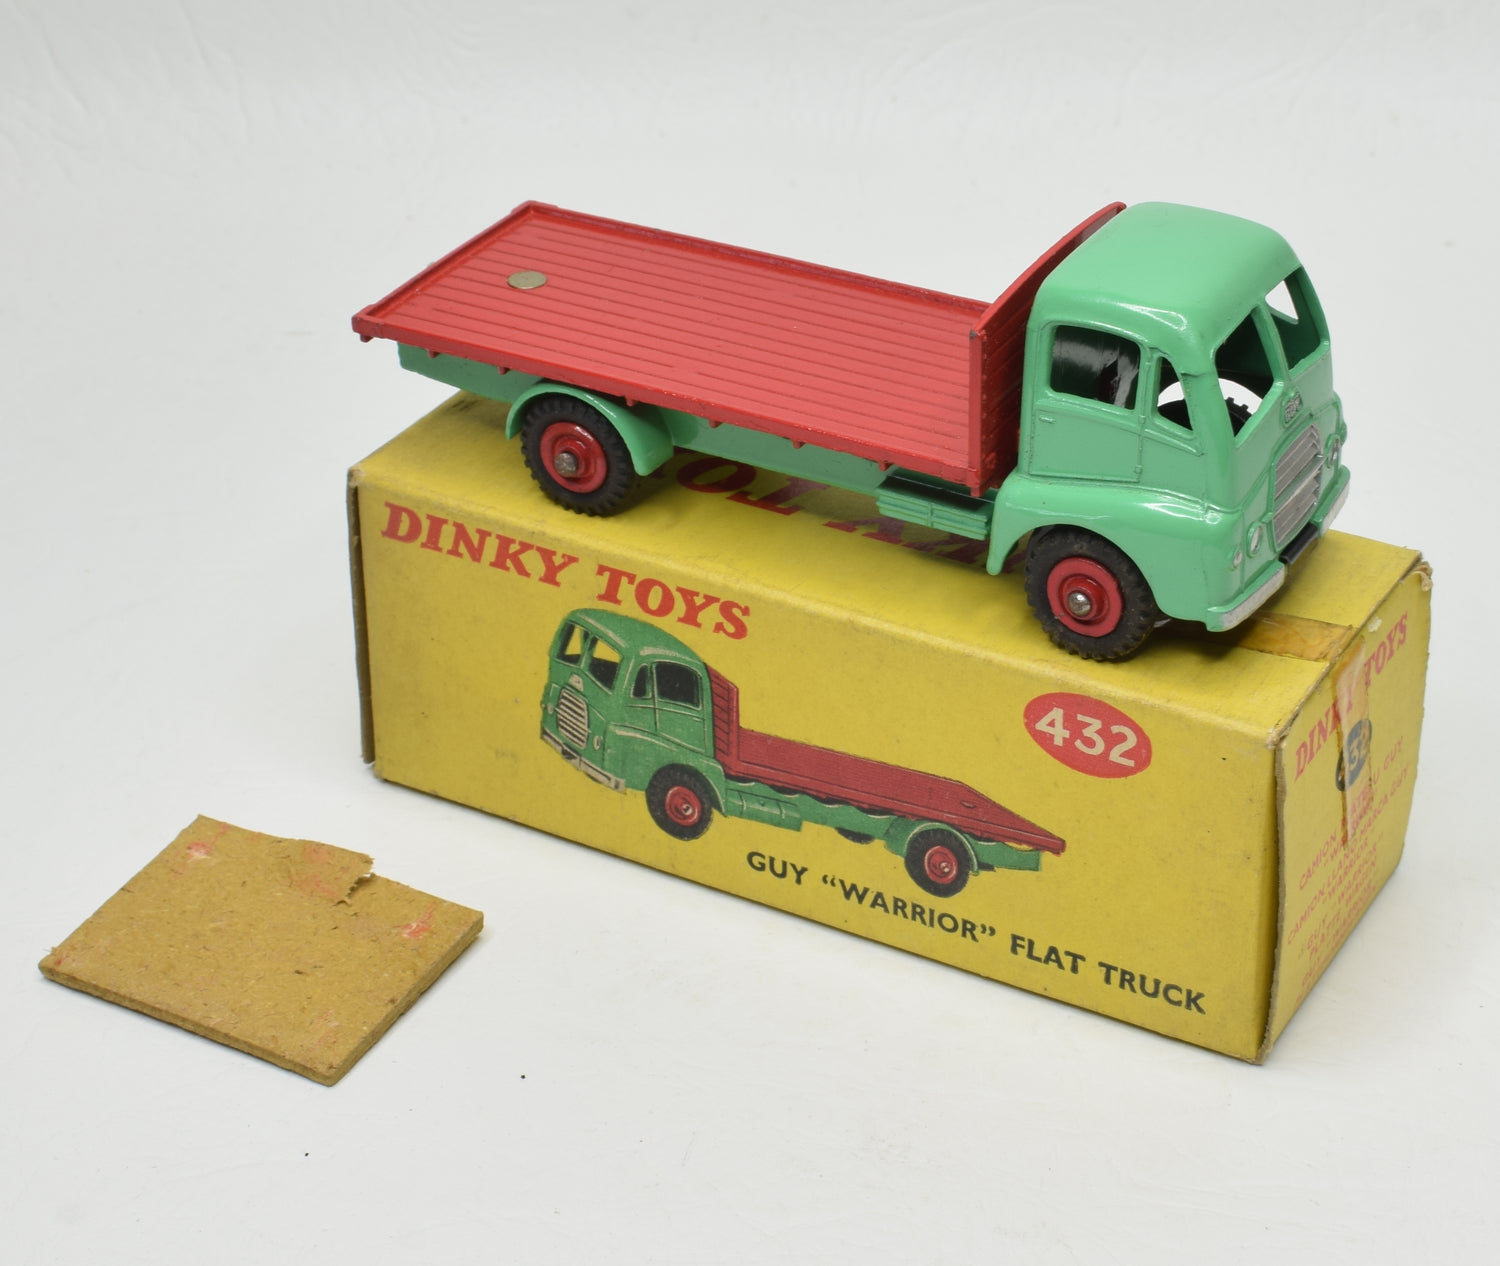 Dinky Toys 432 Guy Warrior Flat Truck Very Near Mint/Boxed 'Brecon' Collection Part 2